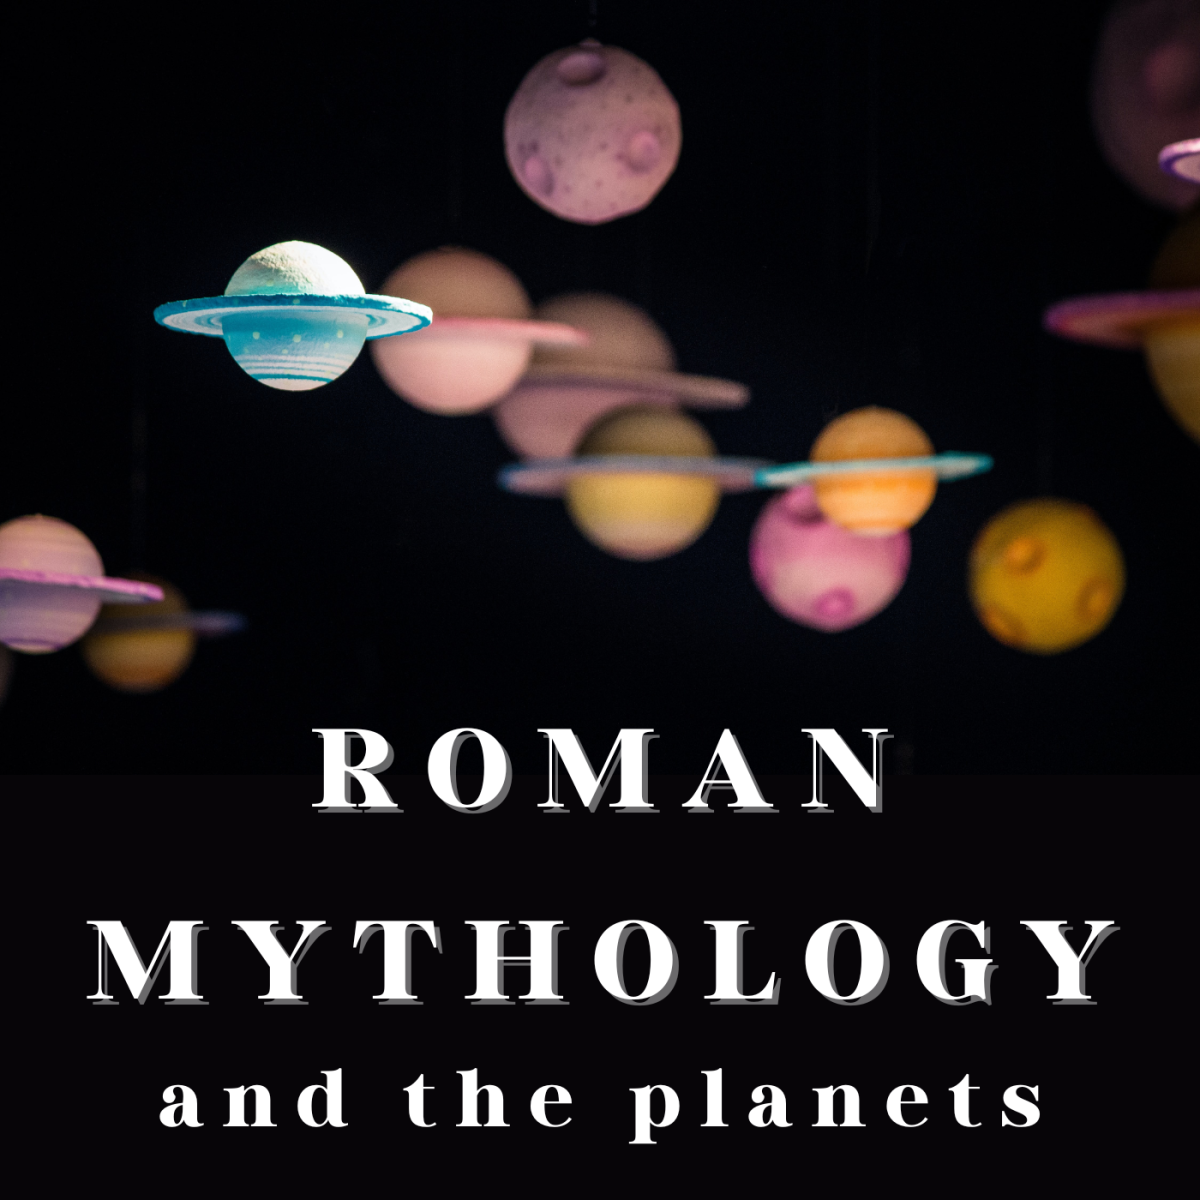 All about the planets and their roles in Roman mythology.